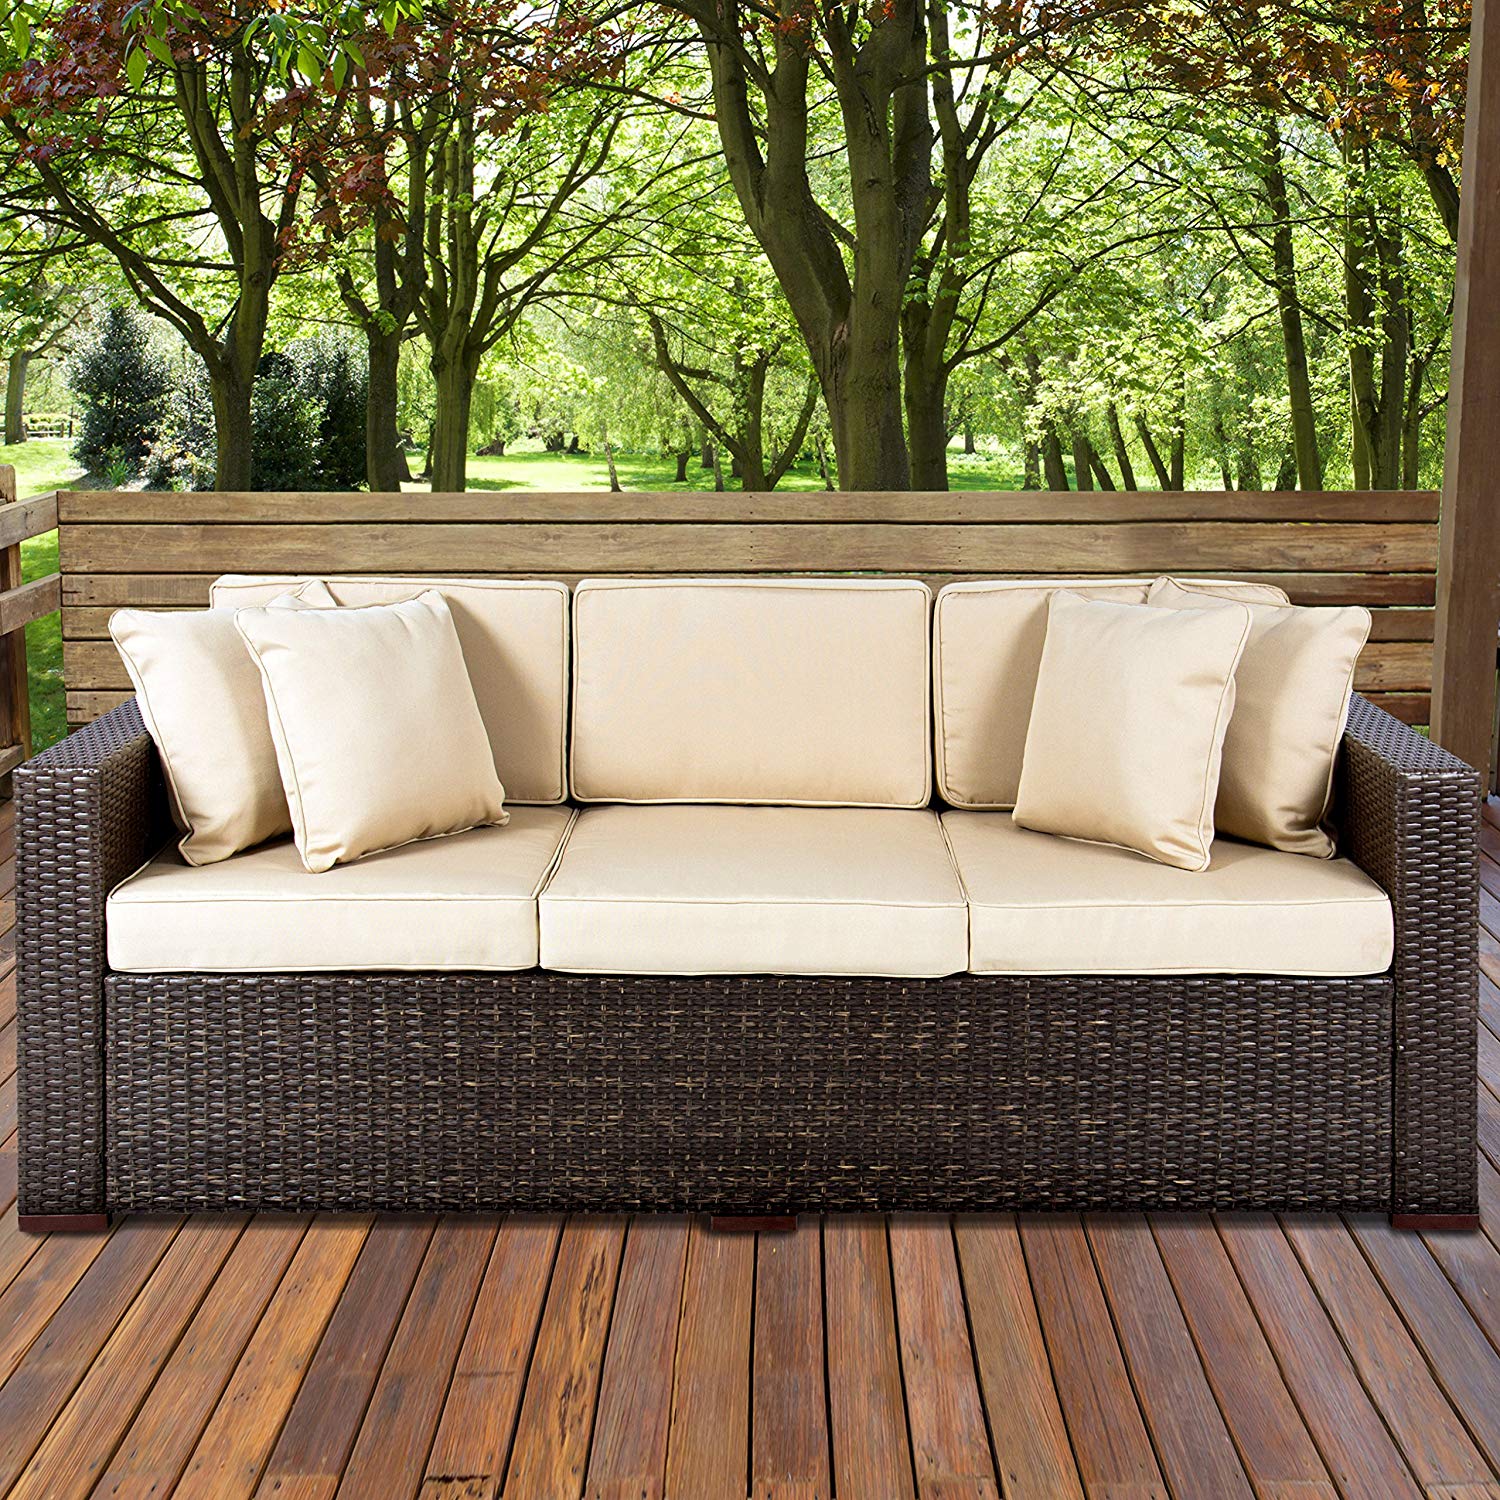 Cheap patio furniture amazon.com : best choice products 3-seat outdoor wicker sofa couch patio IKGZSXH